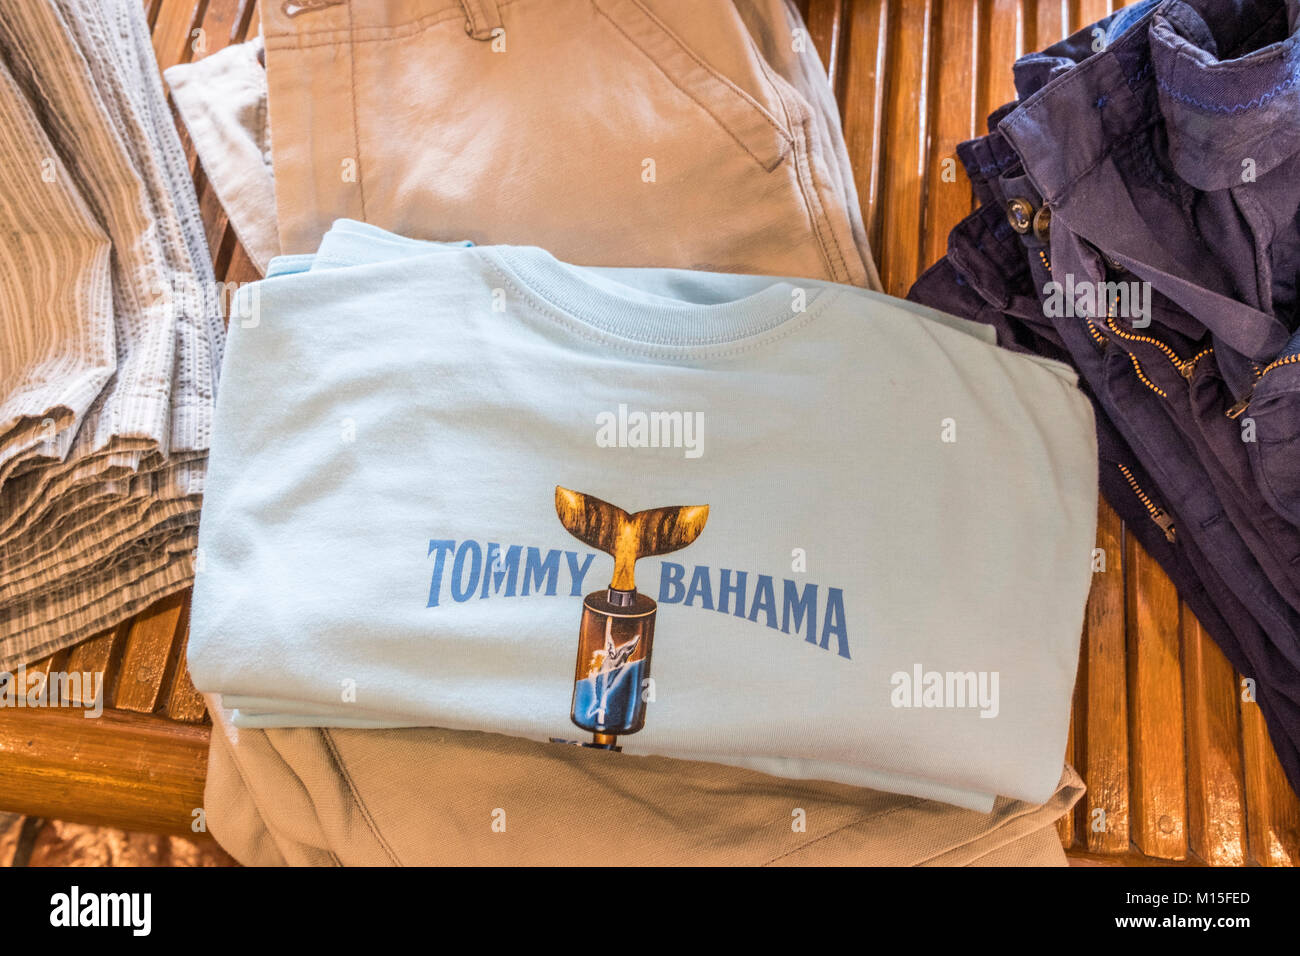 Tommy Bahama retail clothing store 